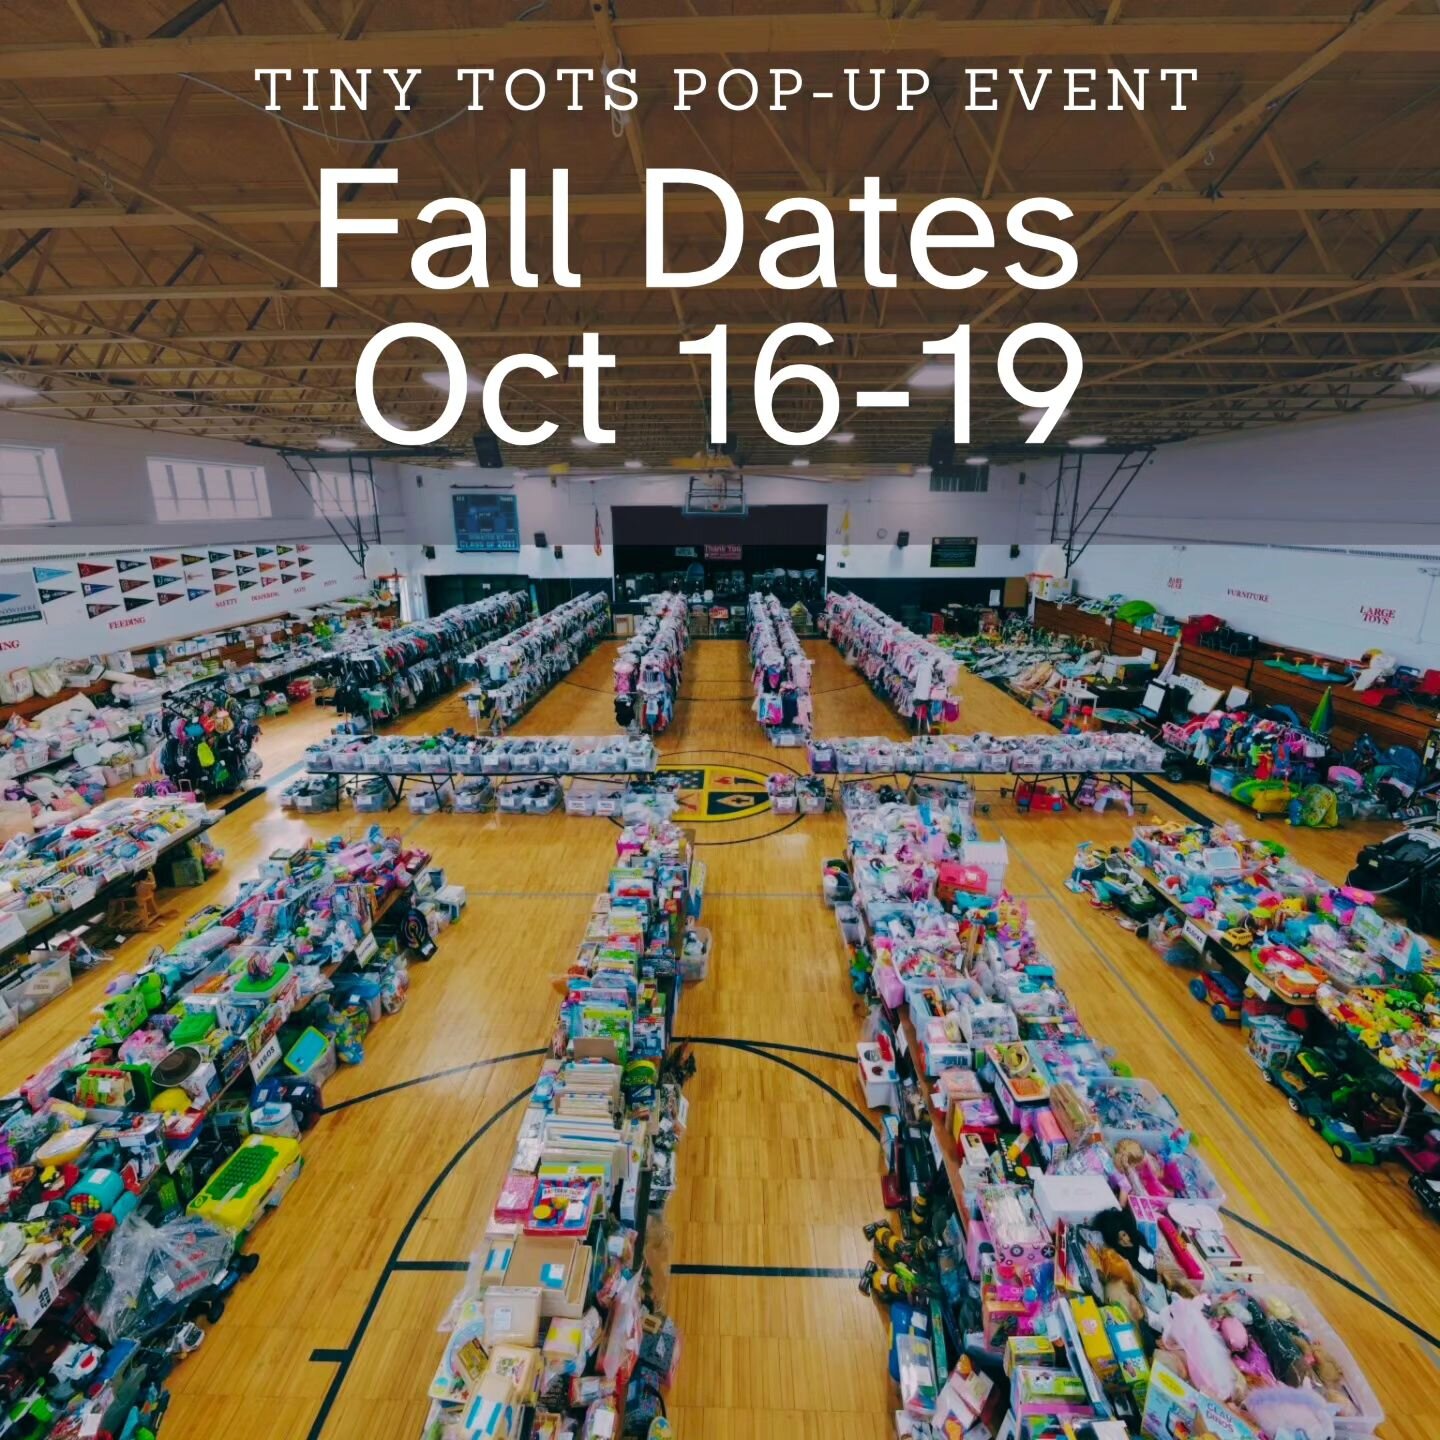 📣 Calling all parents and shopaholics! 🎉 It's time to unleash your shopping superpowers at the TINY TOTS MEGA KIDS EVENT - Fall 2023 Edition!

📅 Mark your calendars:
🔹 VIP PreSale: Oct 17, 11 AM - 9 PM (Pre-registration required)
🔹 Regular Sale: